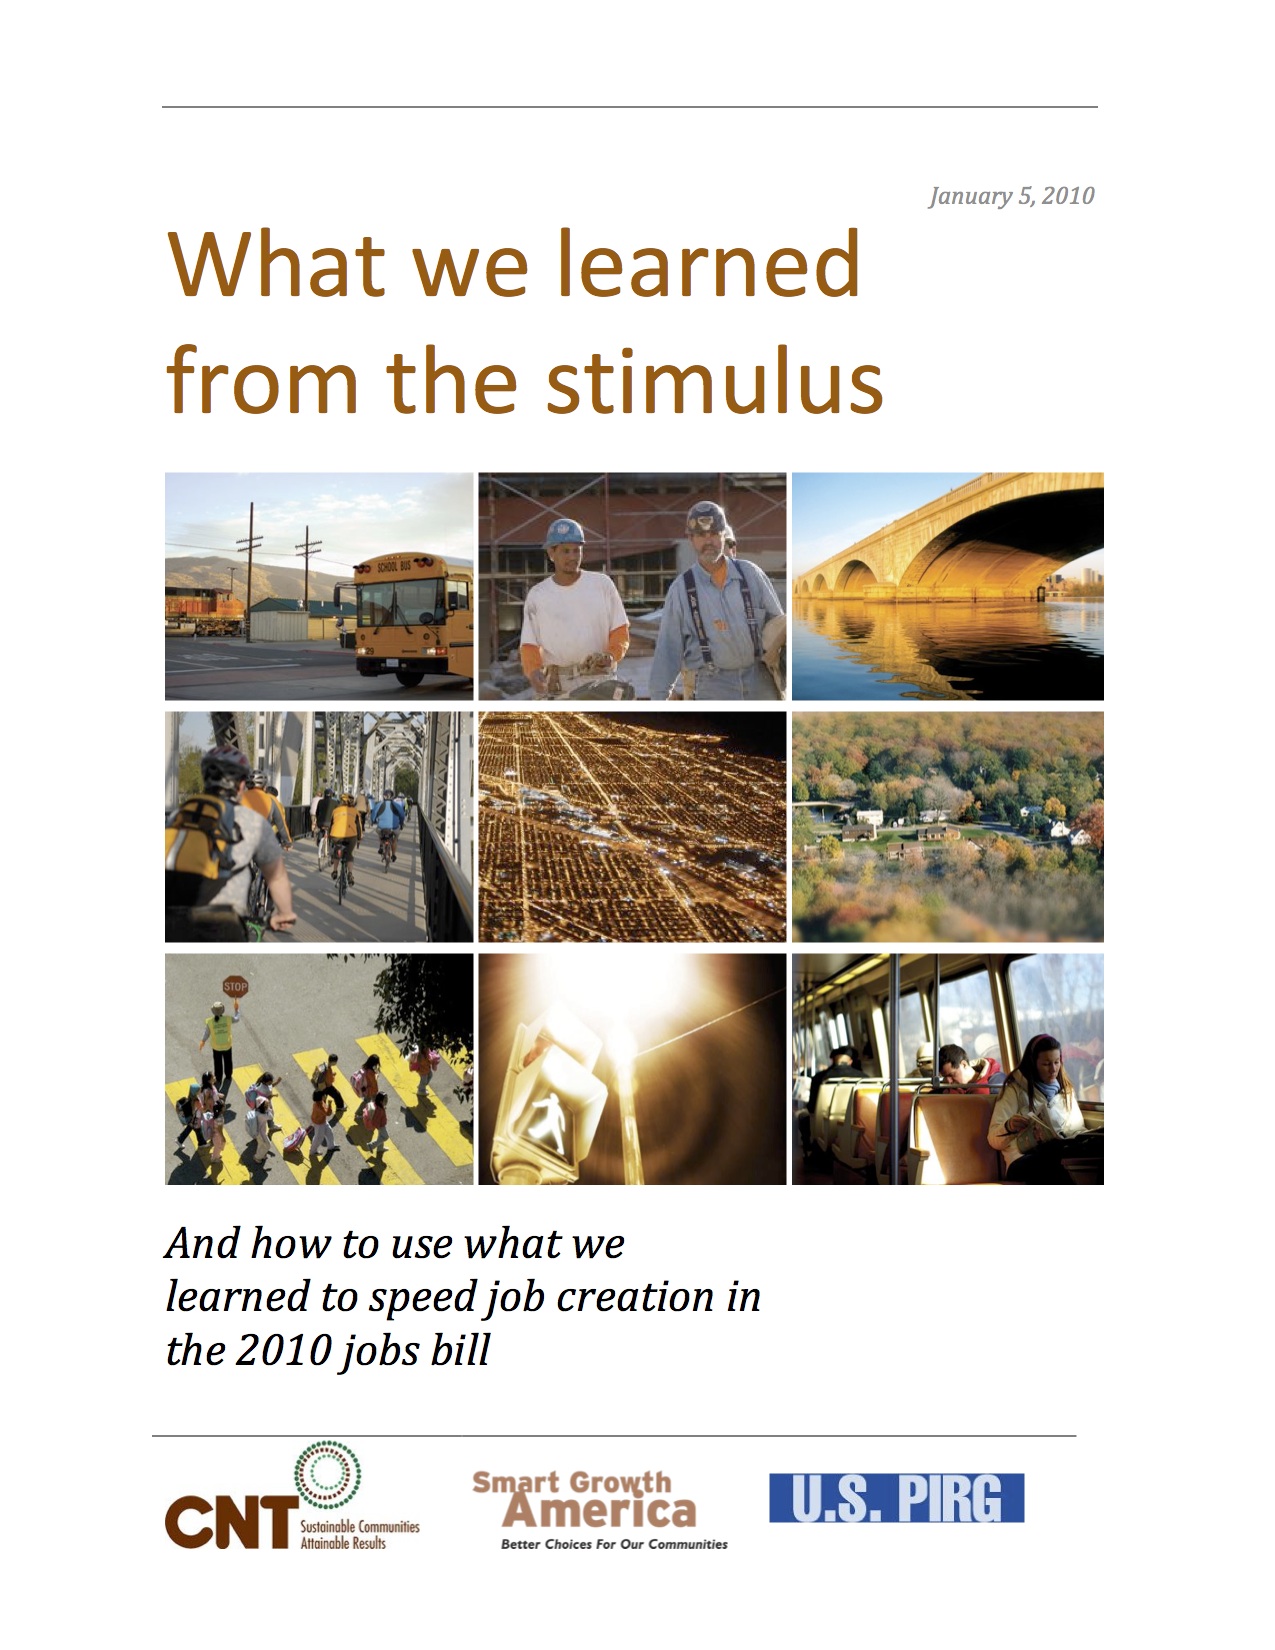 What We Learned from the Stimulus